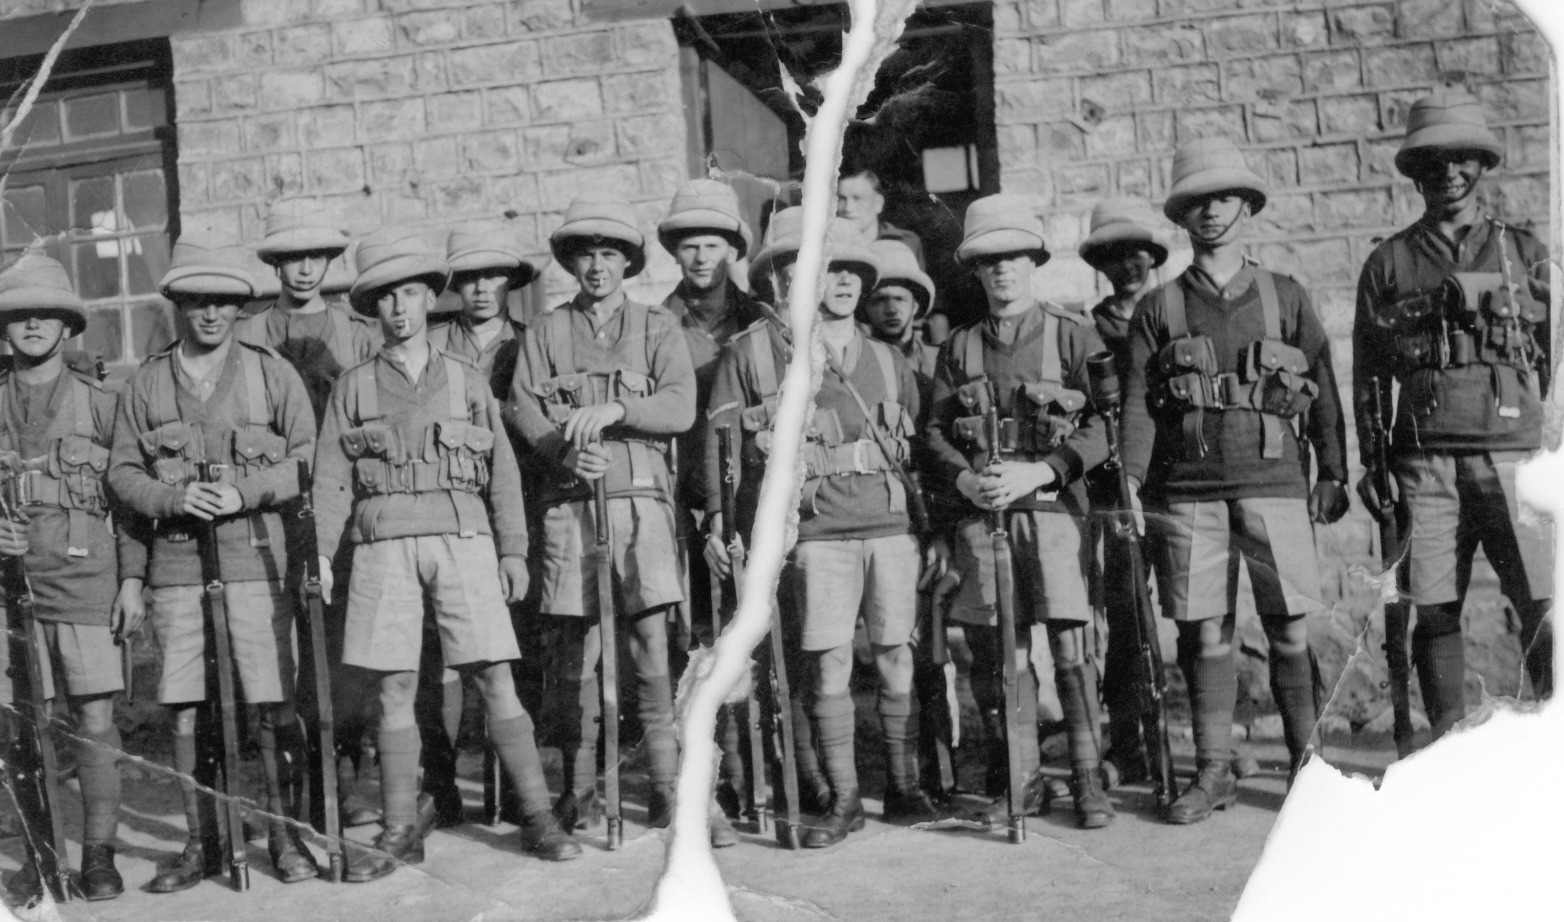 British Army in India